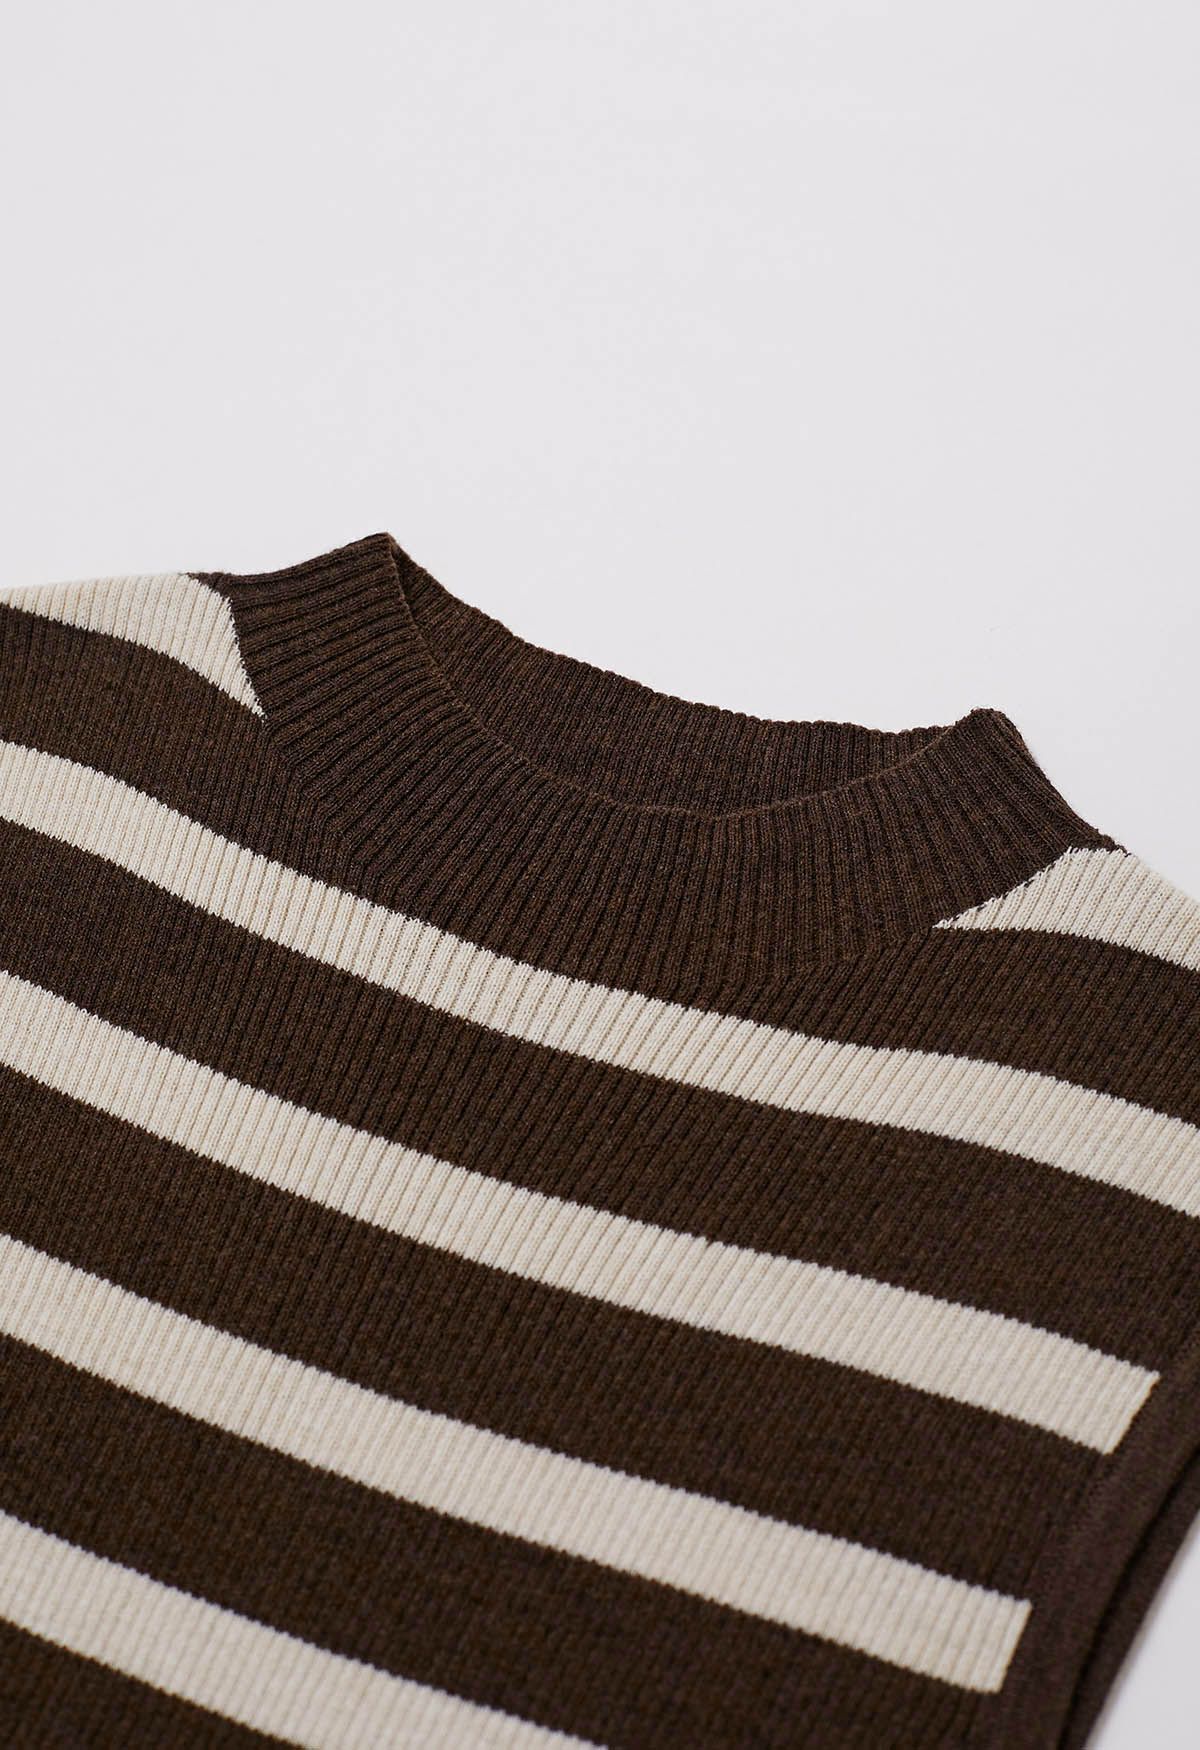 Contrast Stripe Sleeveless Knit Top in Brown